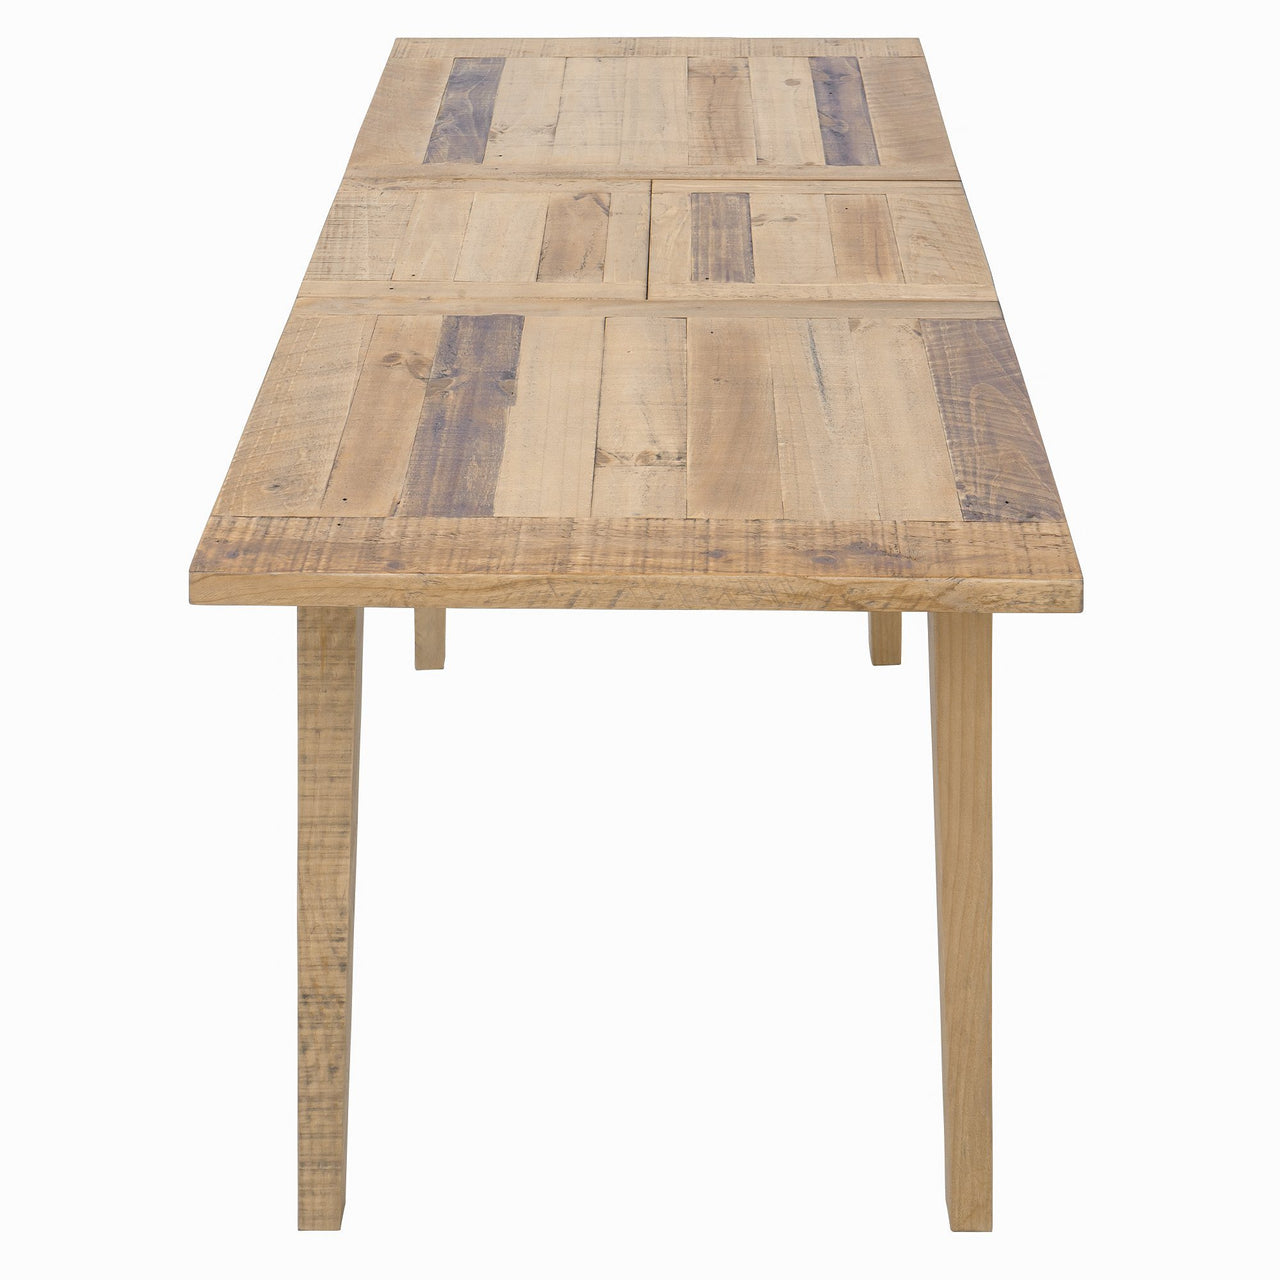 Ashford 62" Reclaimed Wood Rectangular Extension Dining Table Dining Table AndMakers 